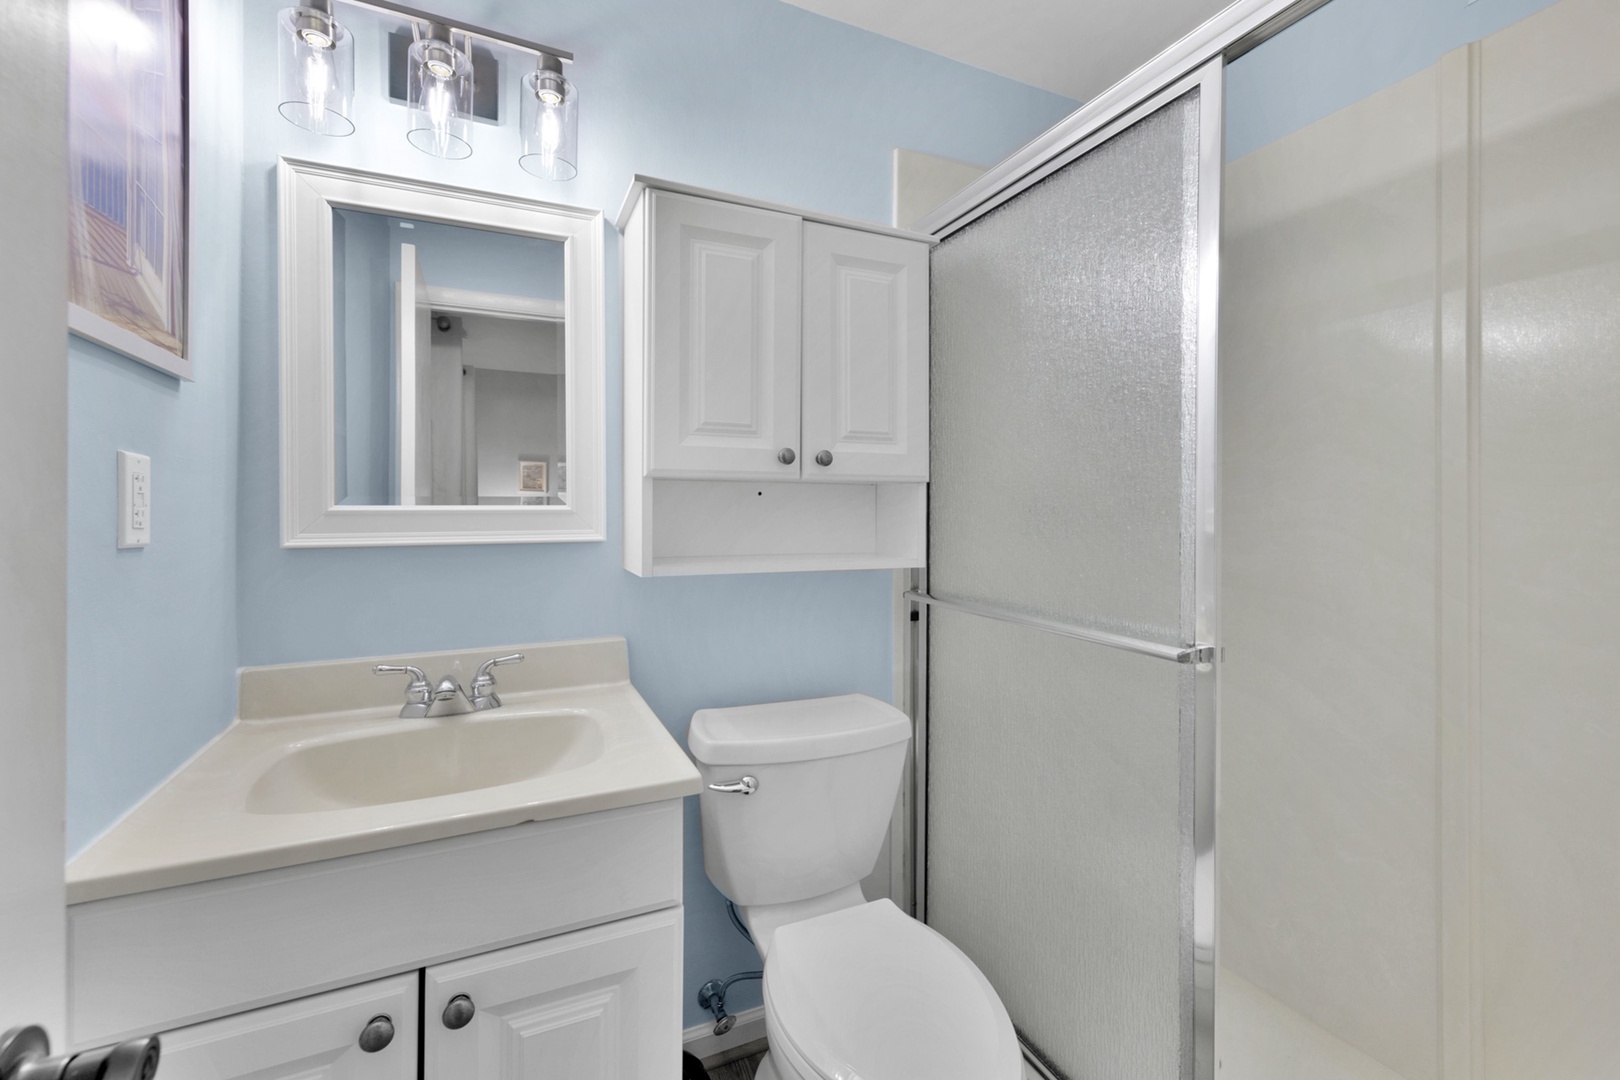 The king ensuite offers a single vanity & glass shower